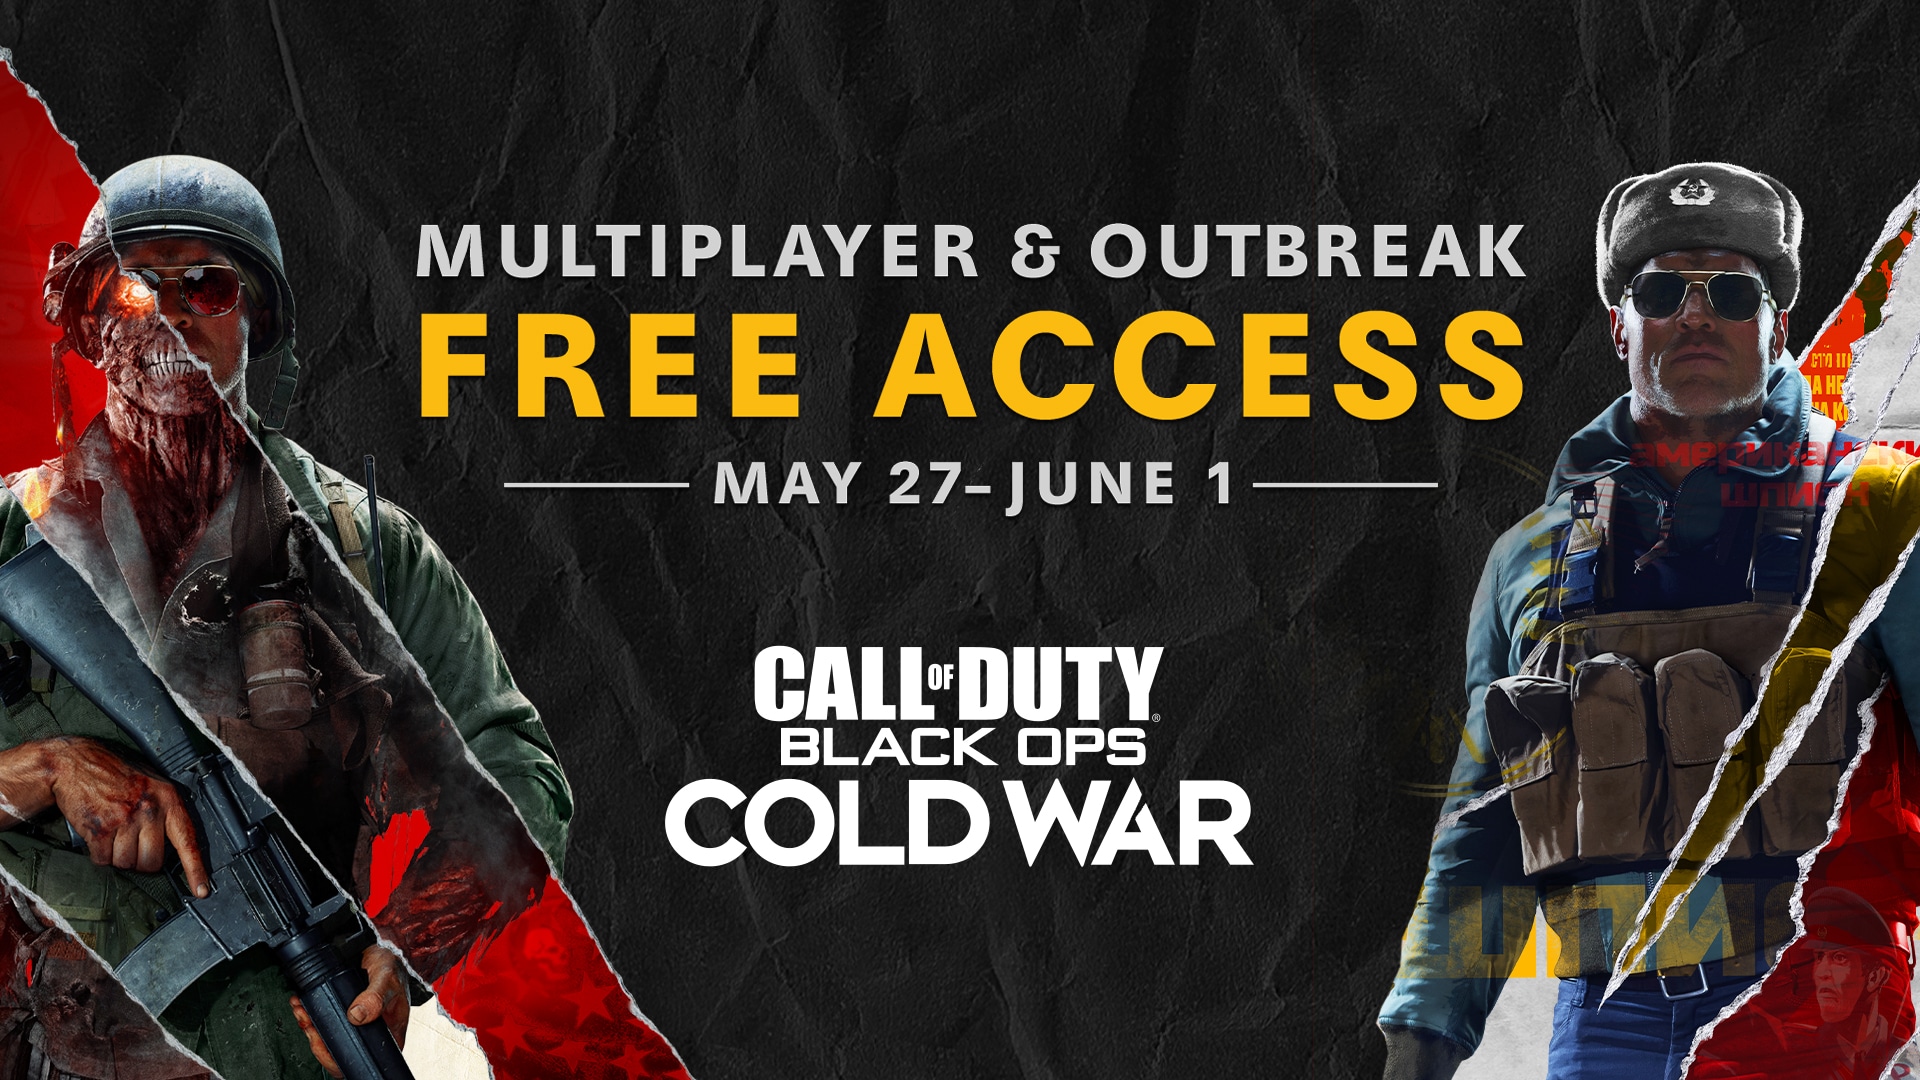 Take advantage of Free Access and throw down with Black Ops Cold War Multiplayer